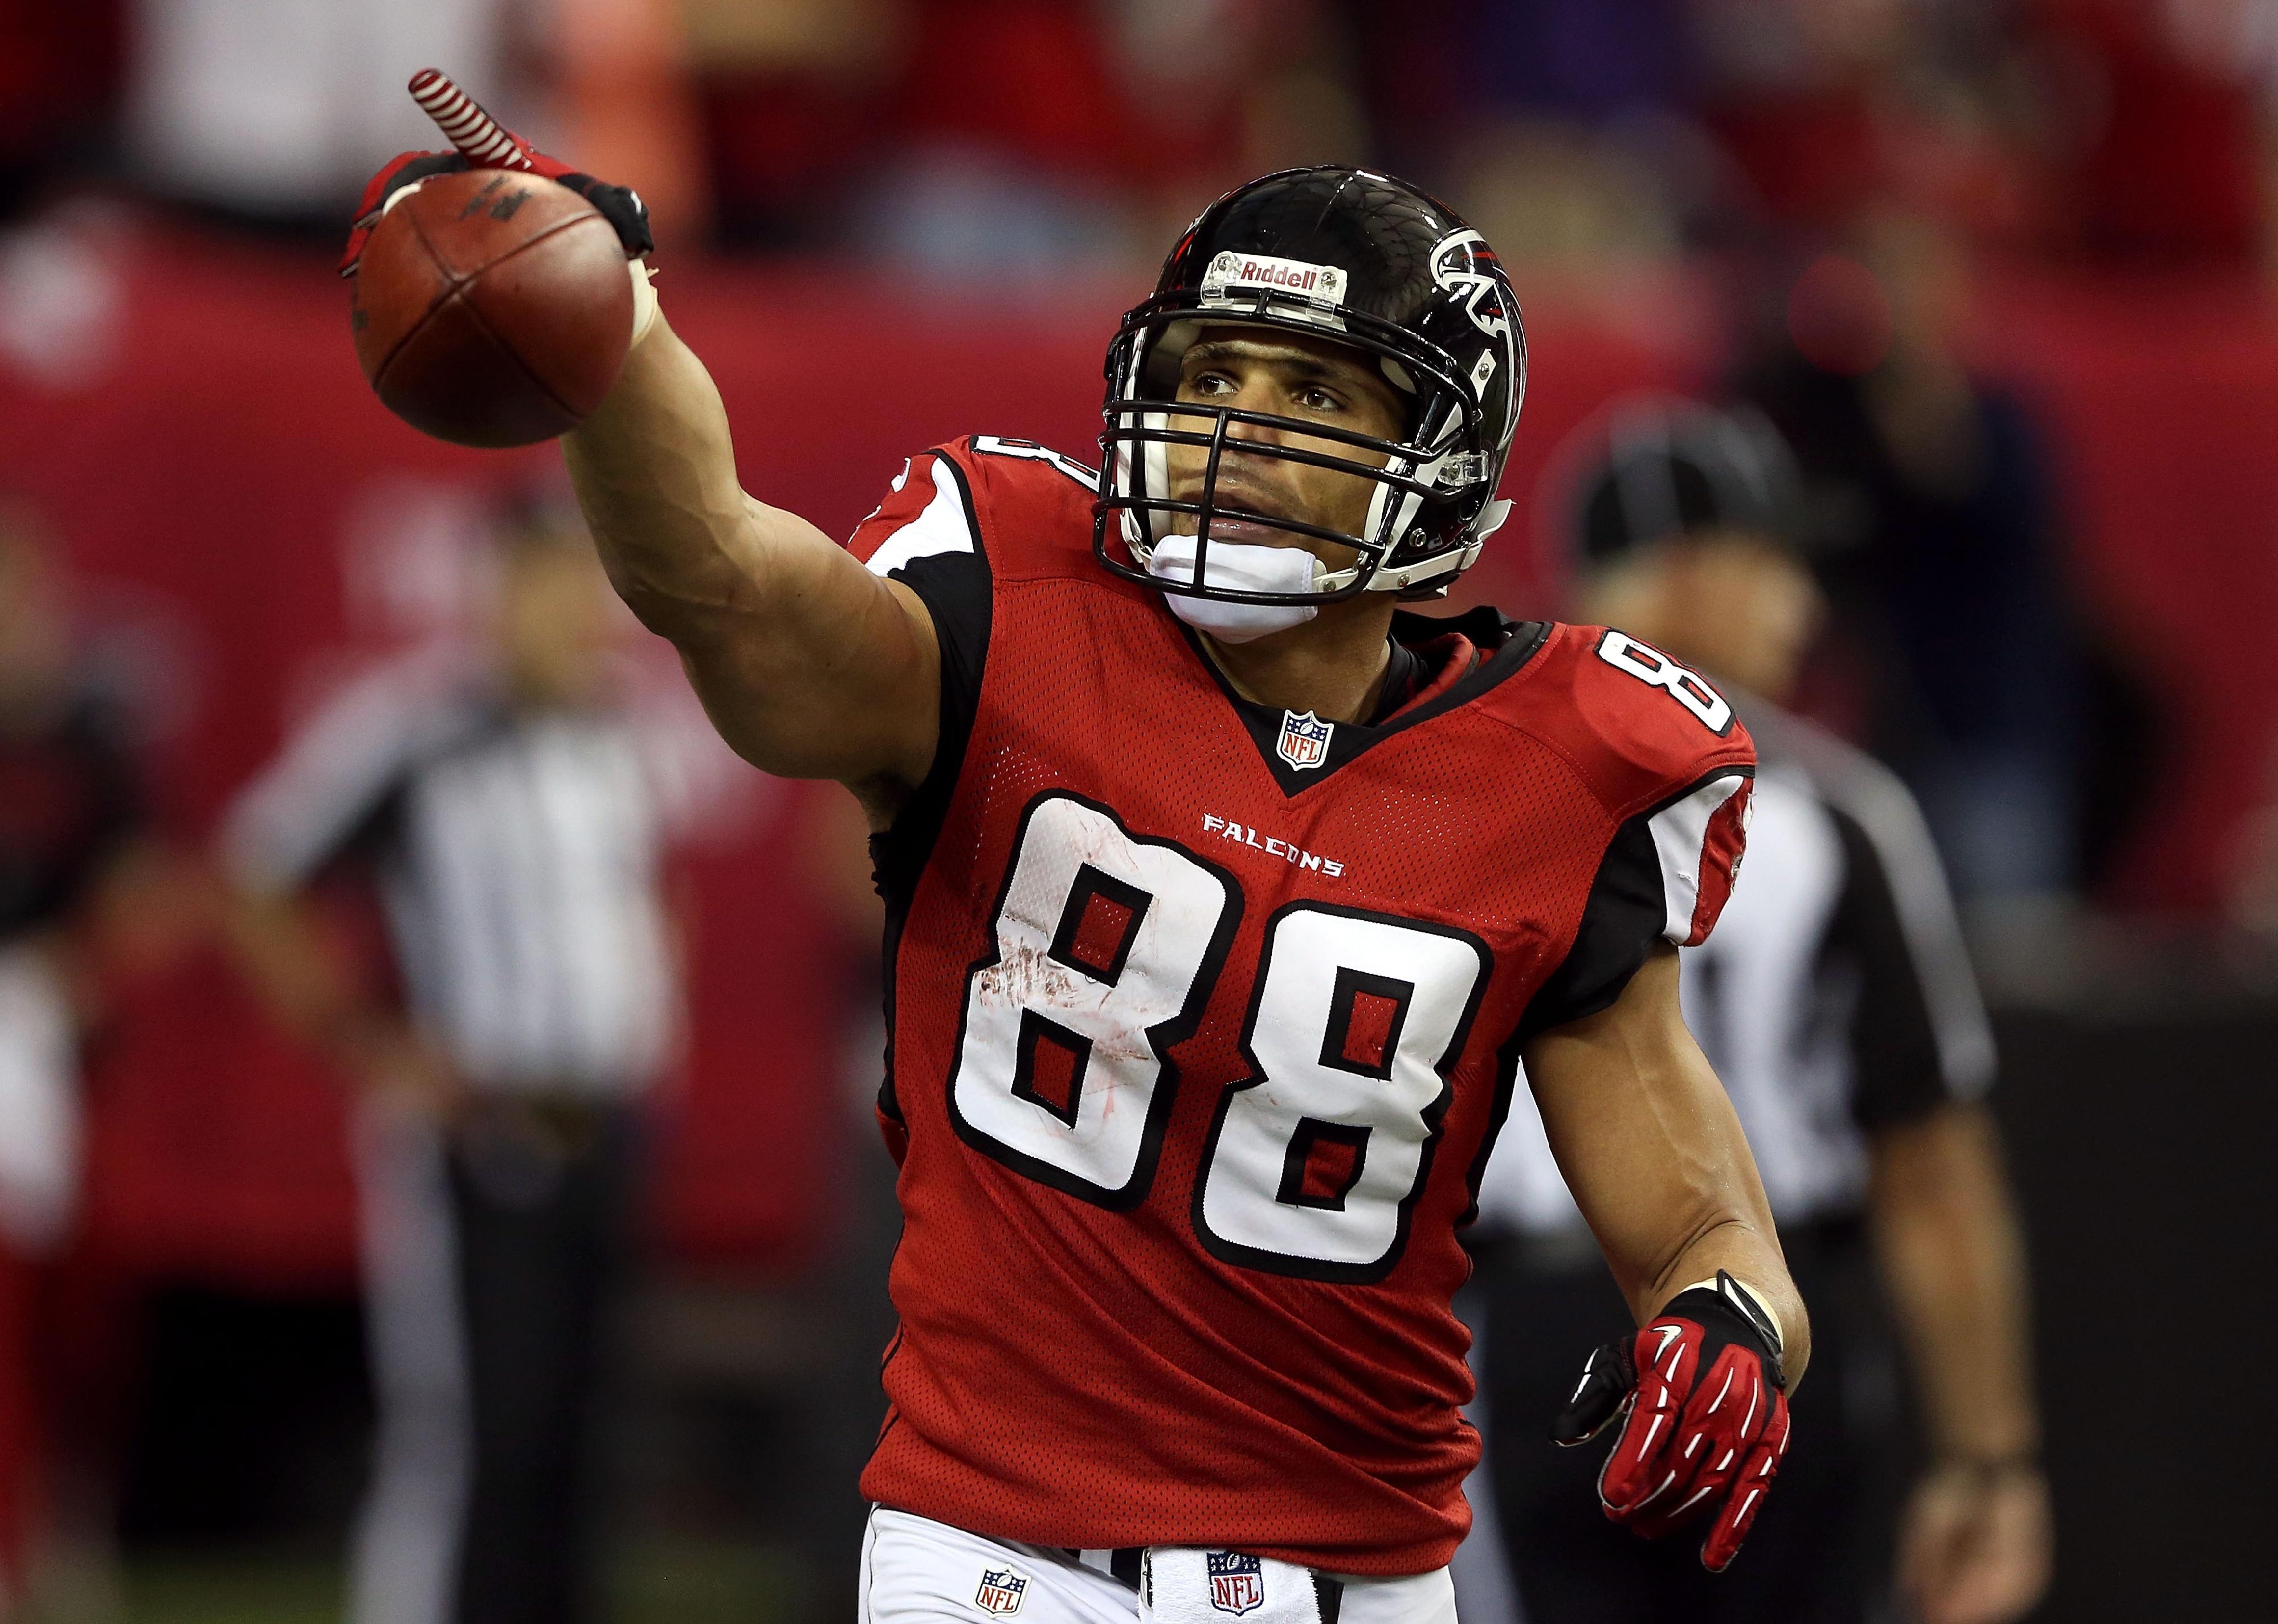 Tony Gonzalez of the Atlanta Falcons celebrates after catching a touchdown